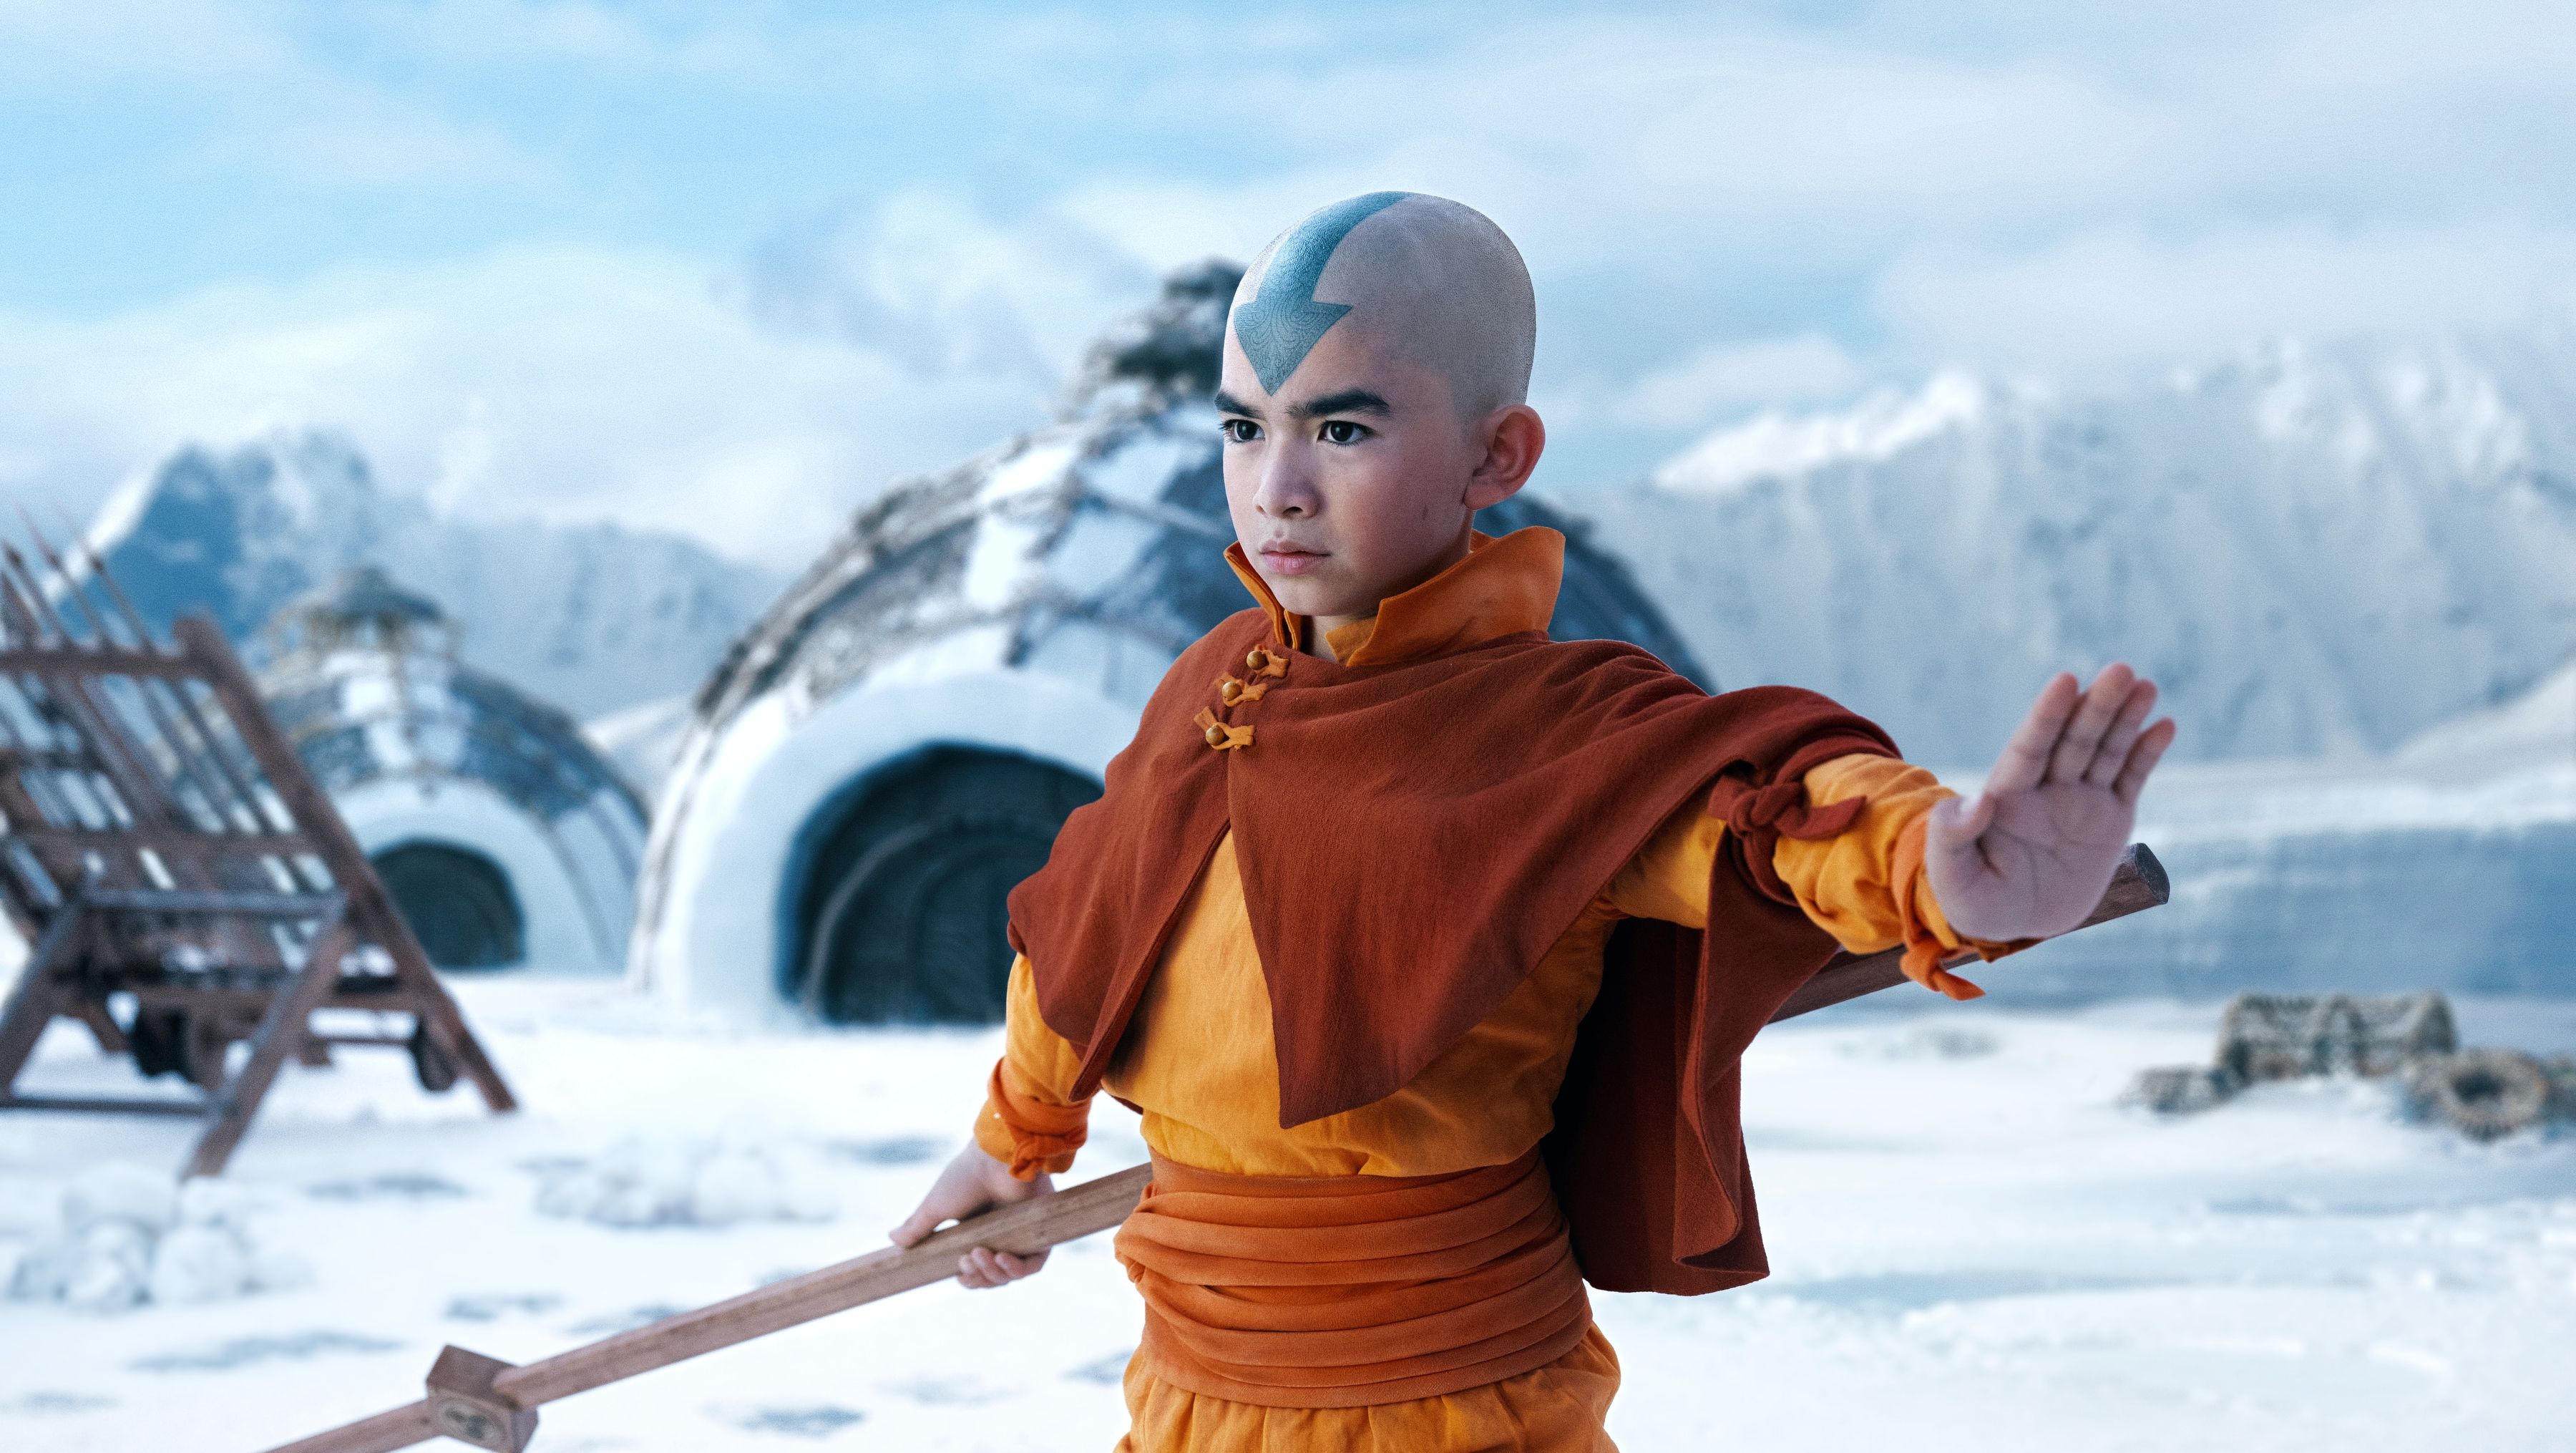 How to see Avatar: The Last Airbender's UK orchestra concert